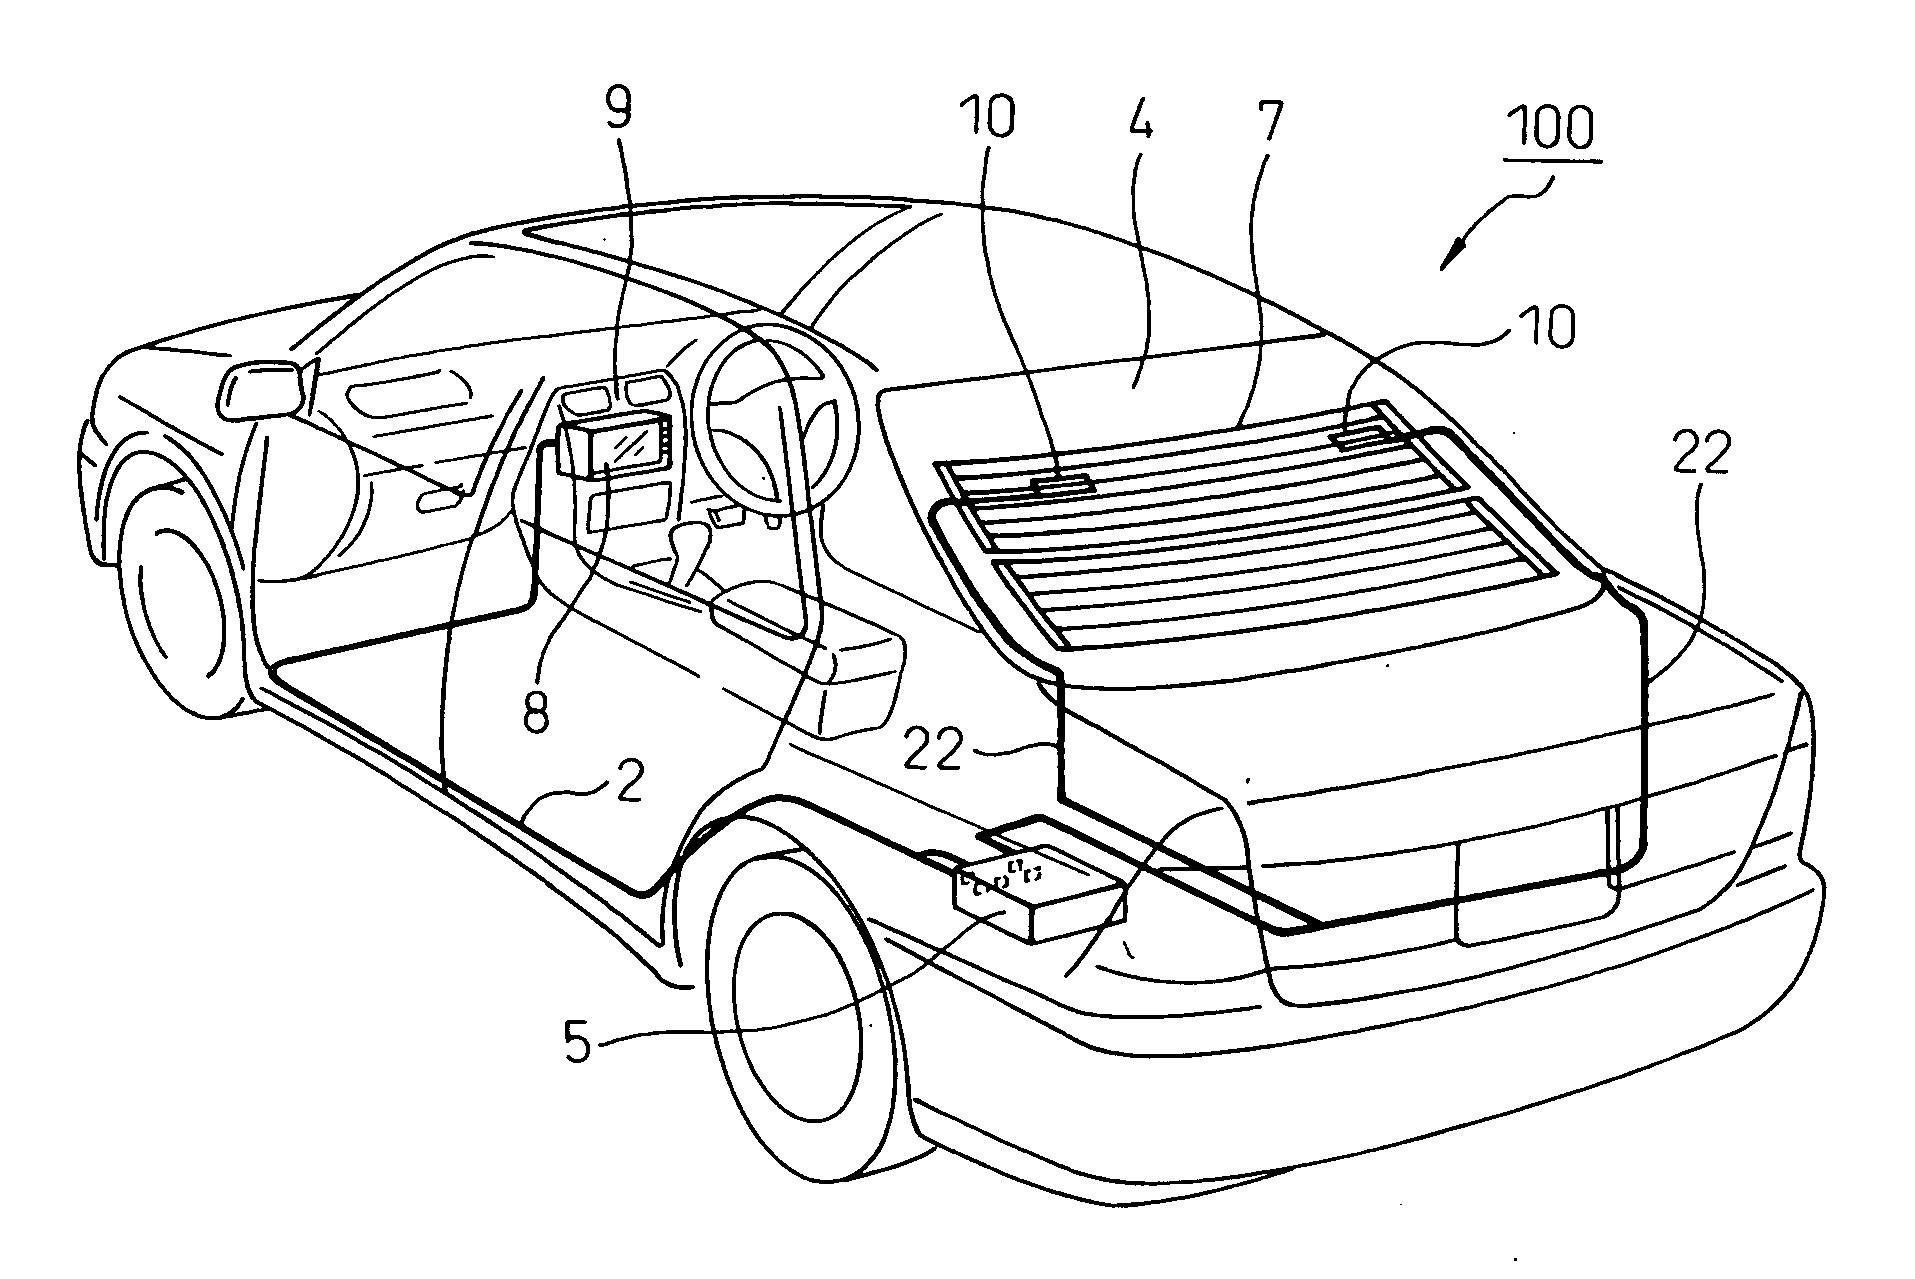 Loop antenna attached to rear window of vehicle